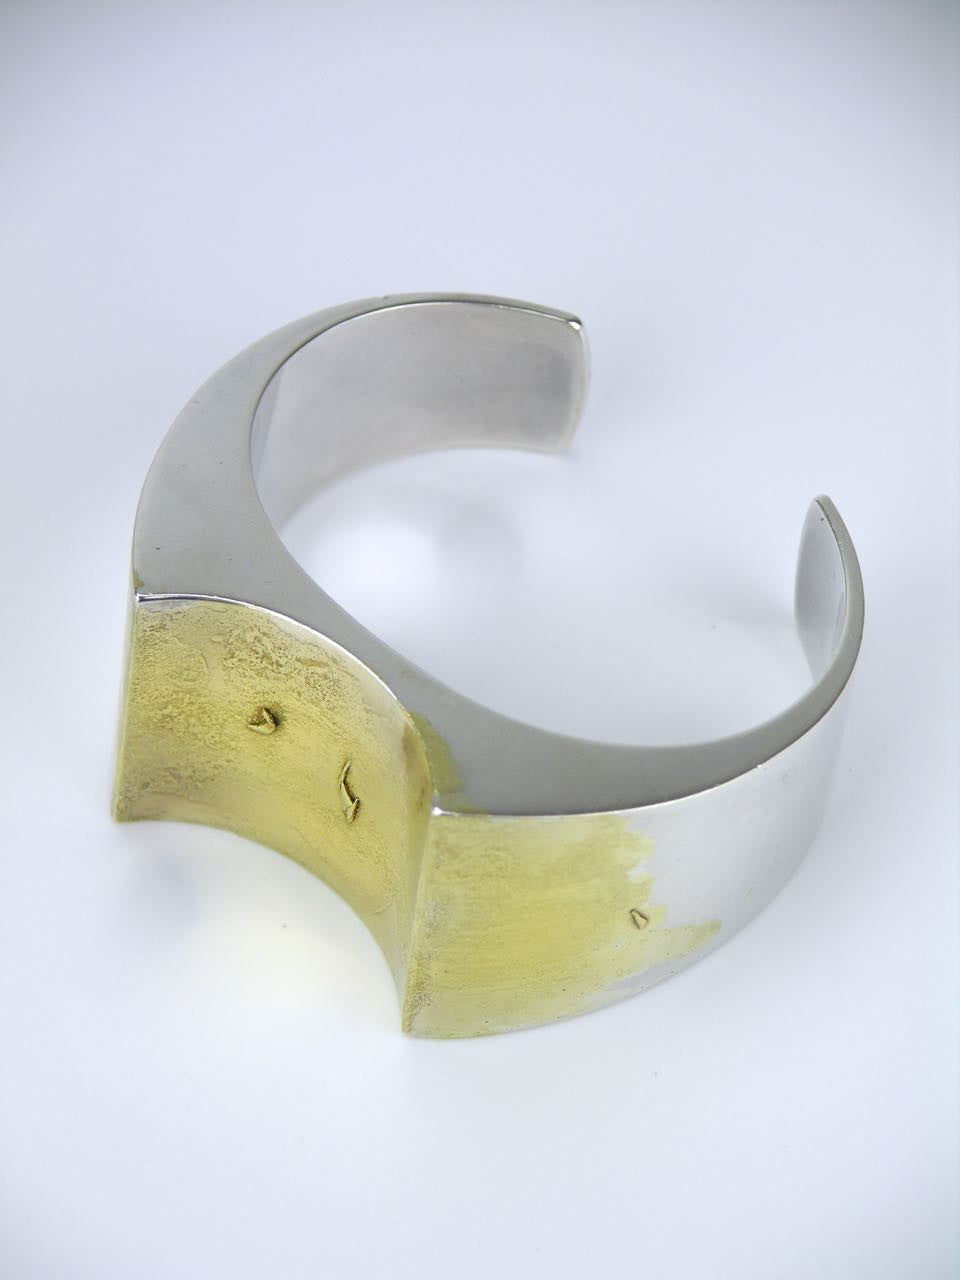 Vagn Hemmingsen silver and fire gilded cuff